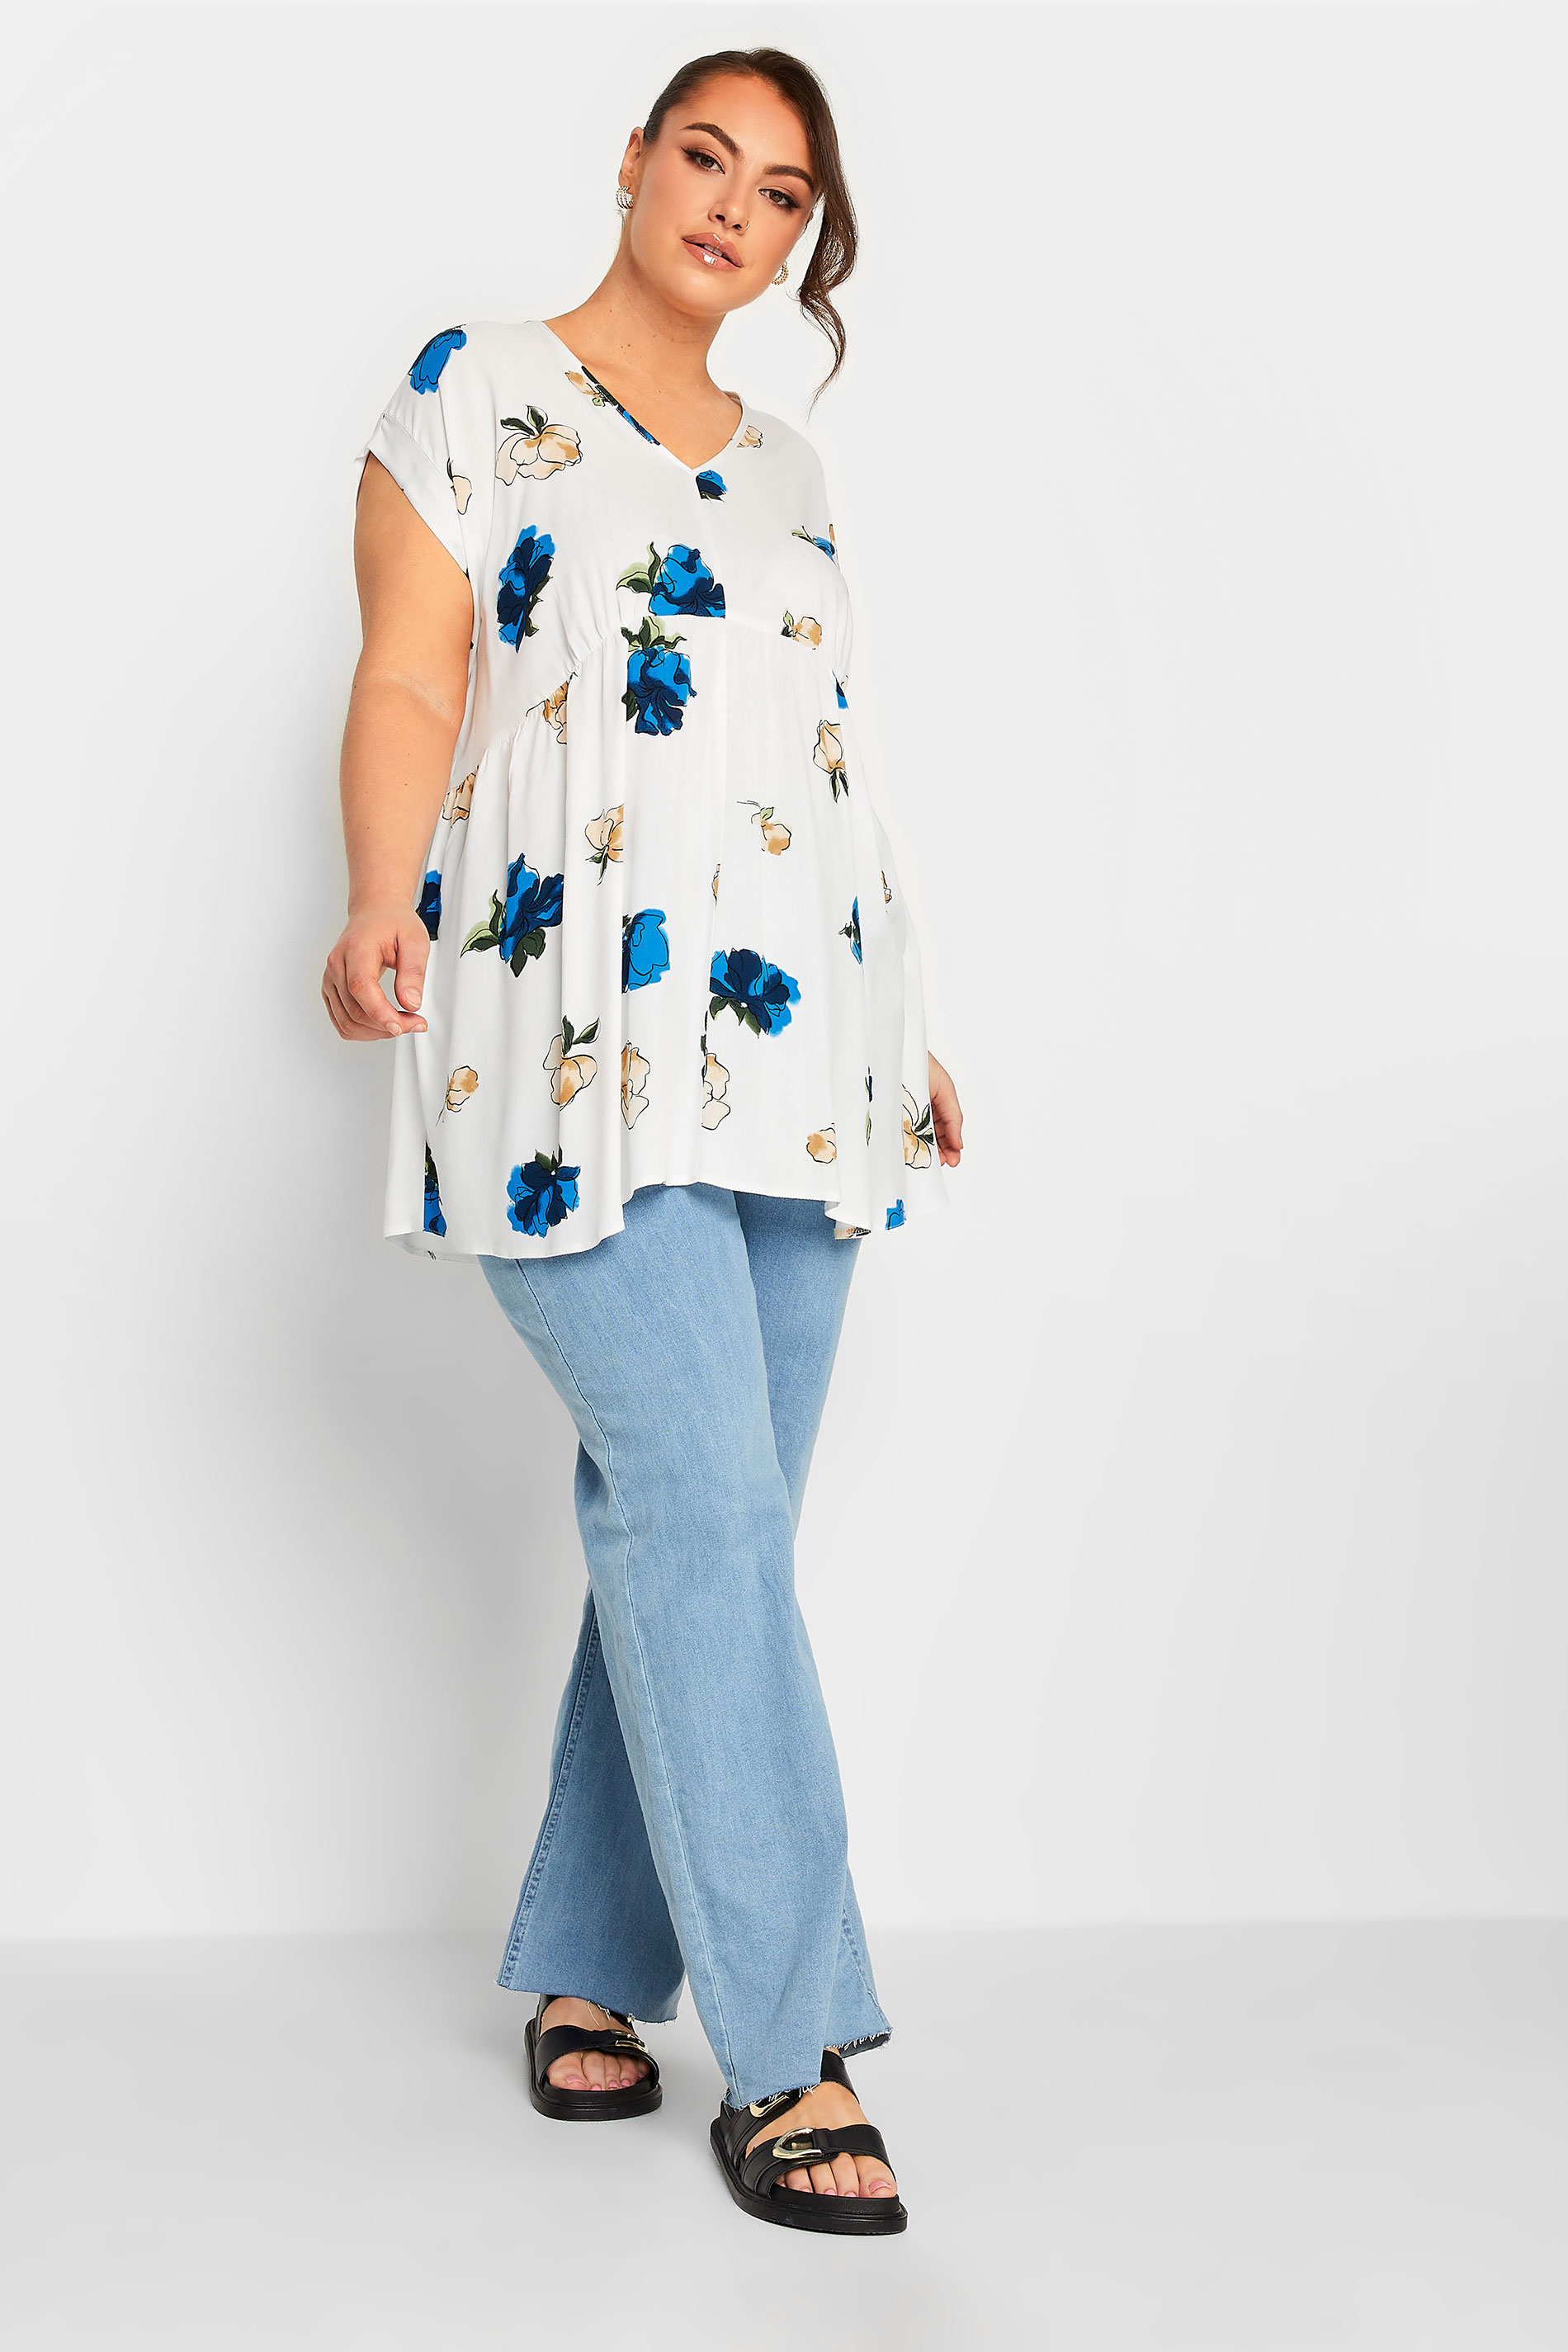 YOURS Plus Size White & Blue Floral Print Peplum Blouse | Yours Clothing 2